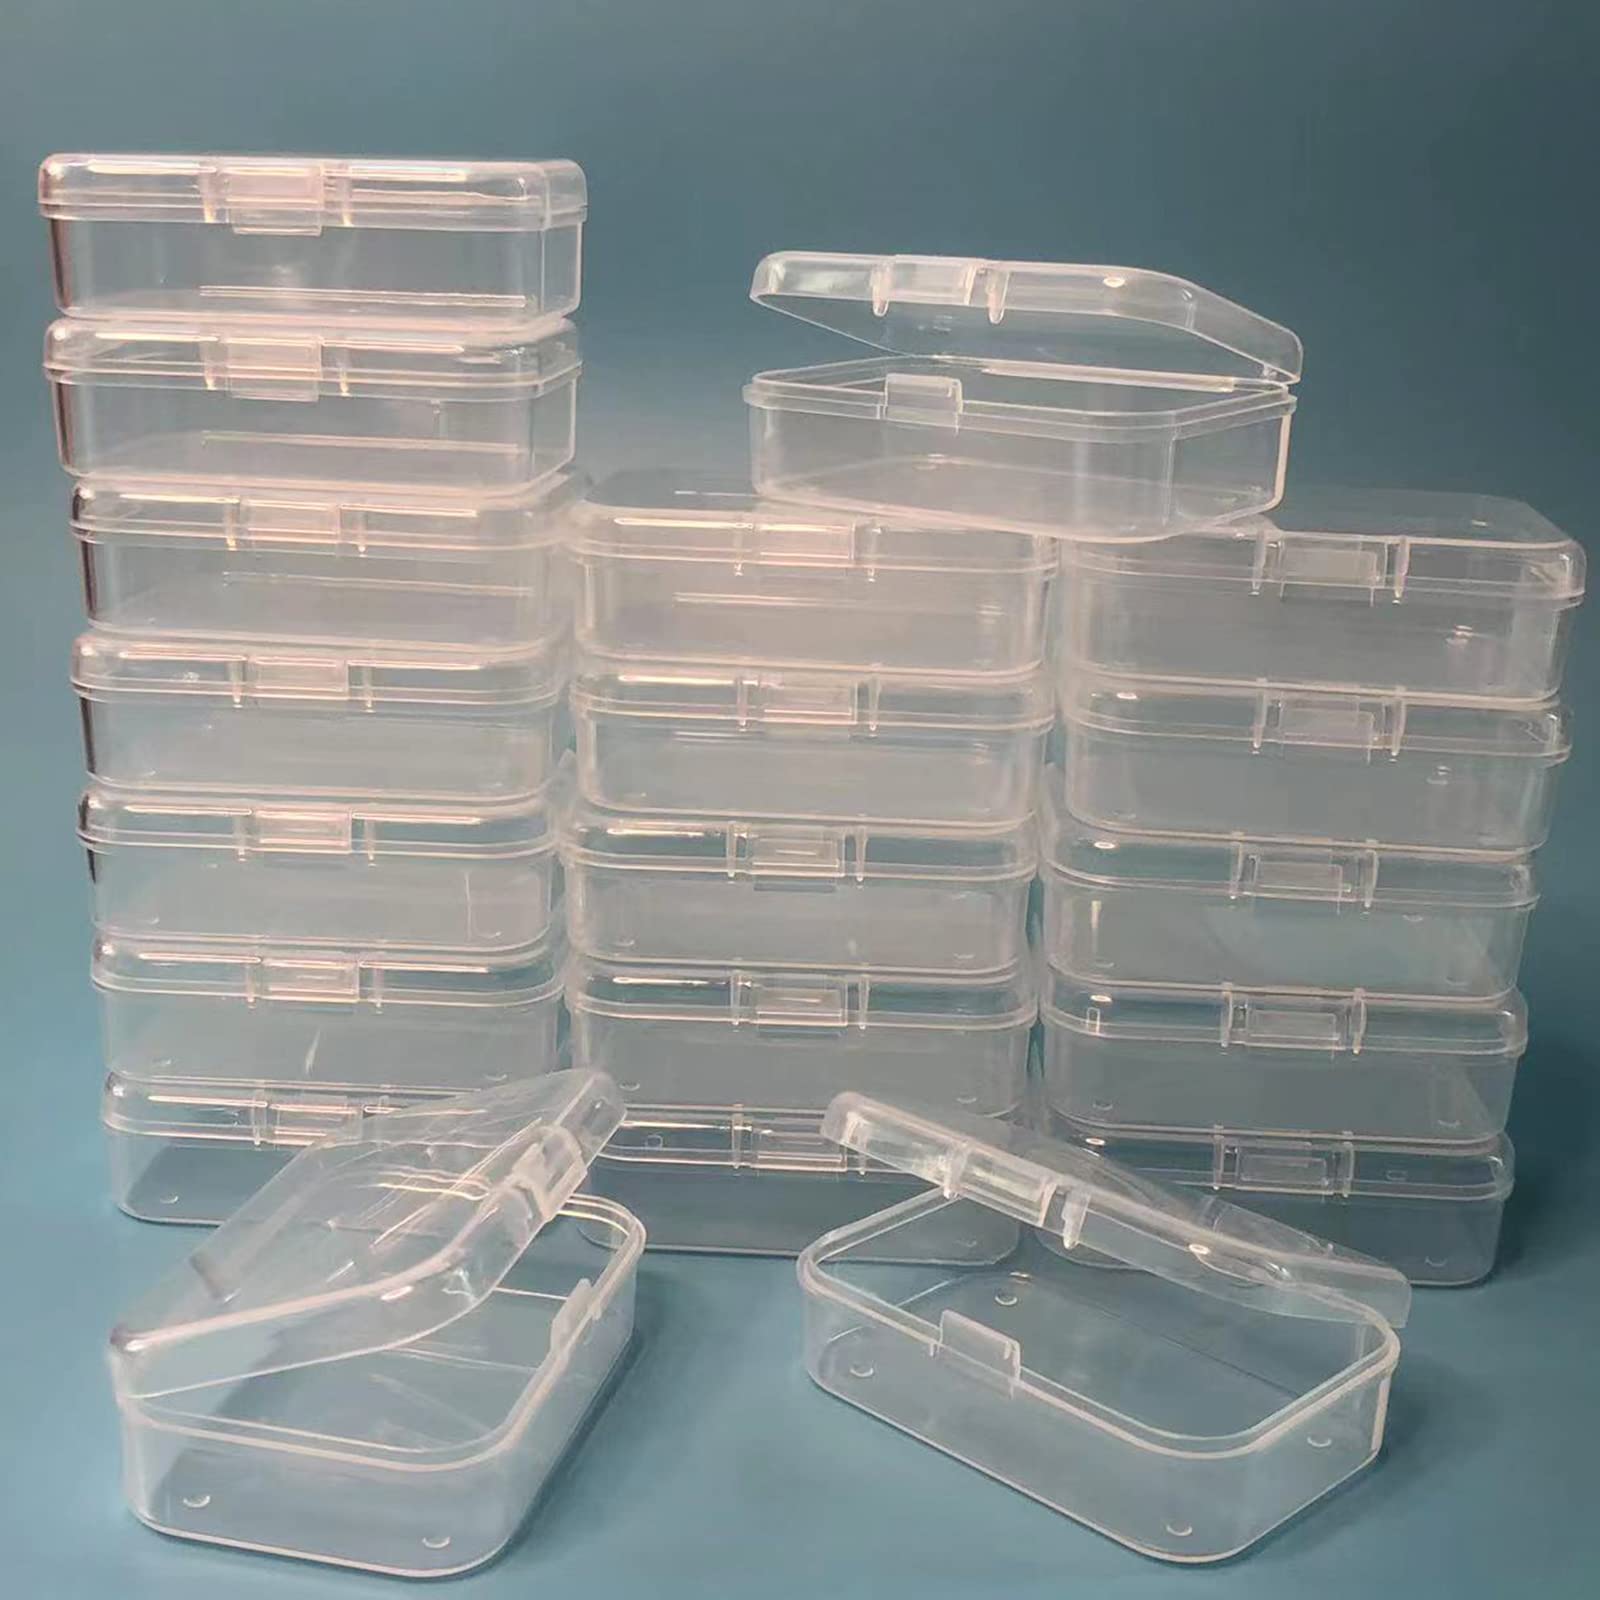 Wotermly 20 Pcs Mini Storage Containers Small Rectangle Plastic Clear Beads  Storage Containers Box with Hinged Lid for Storage of Tiny Items (Size B 20  Pcs) SizeB20P